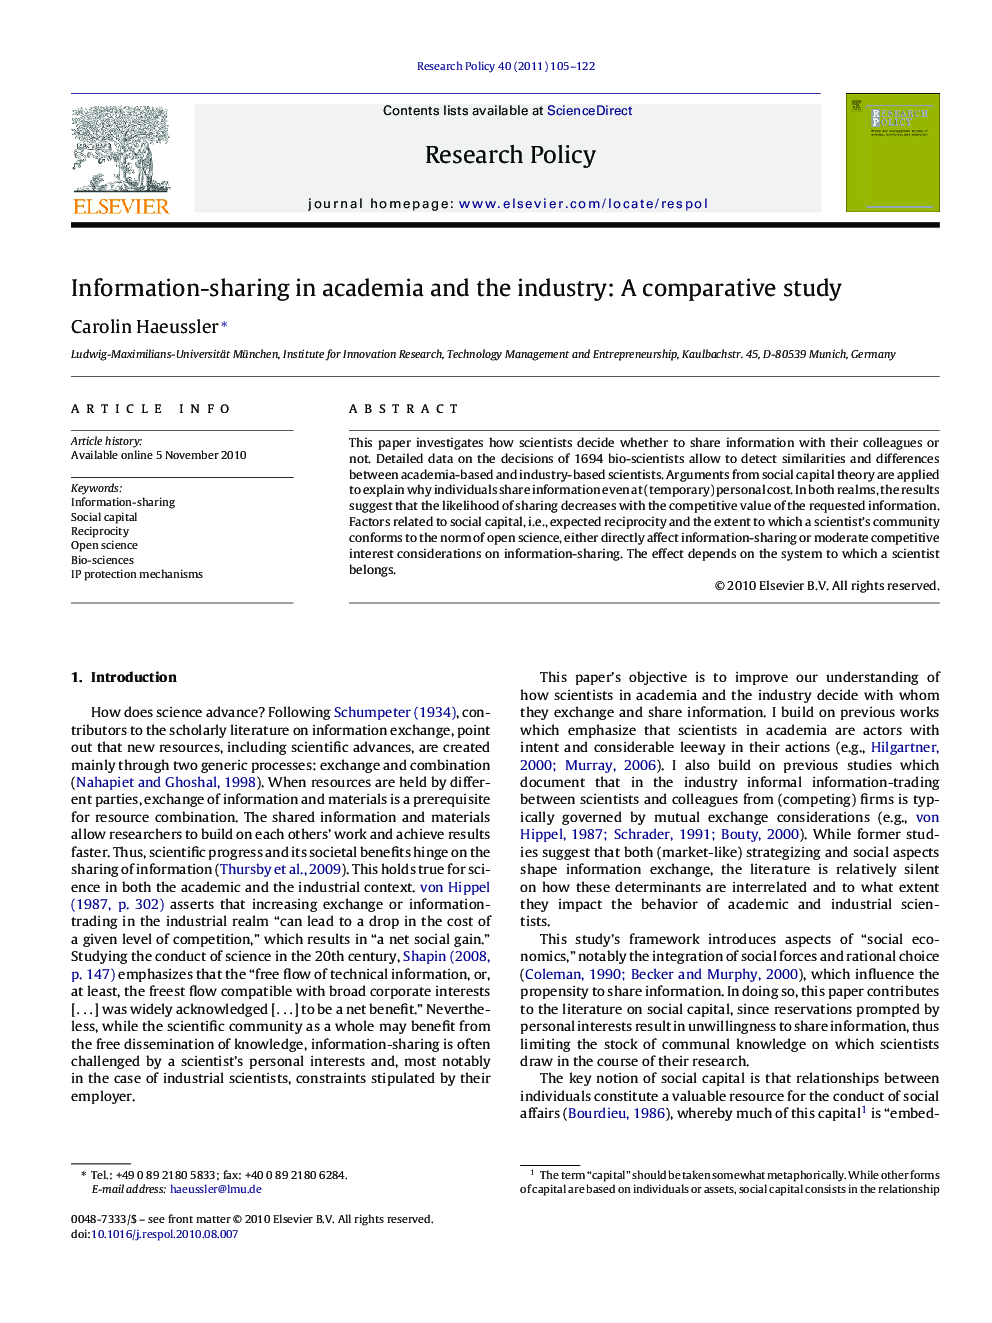 Information-sharing in academia and the industry: A comparative study